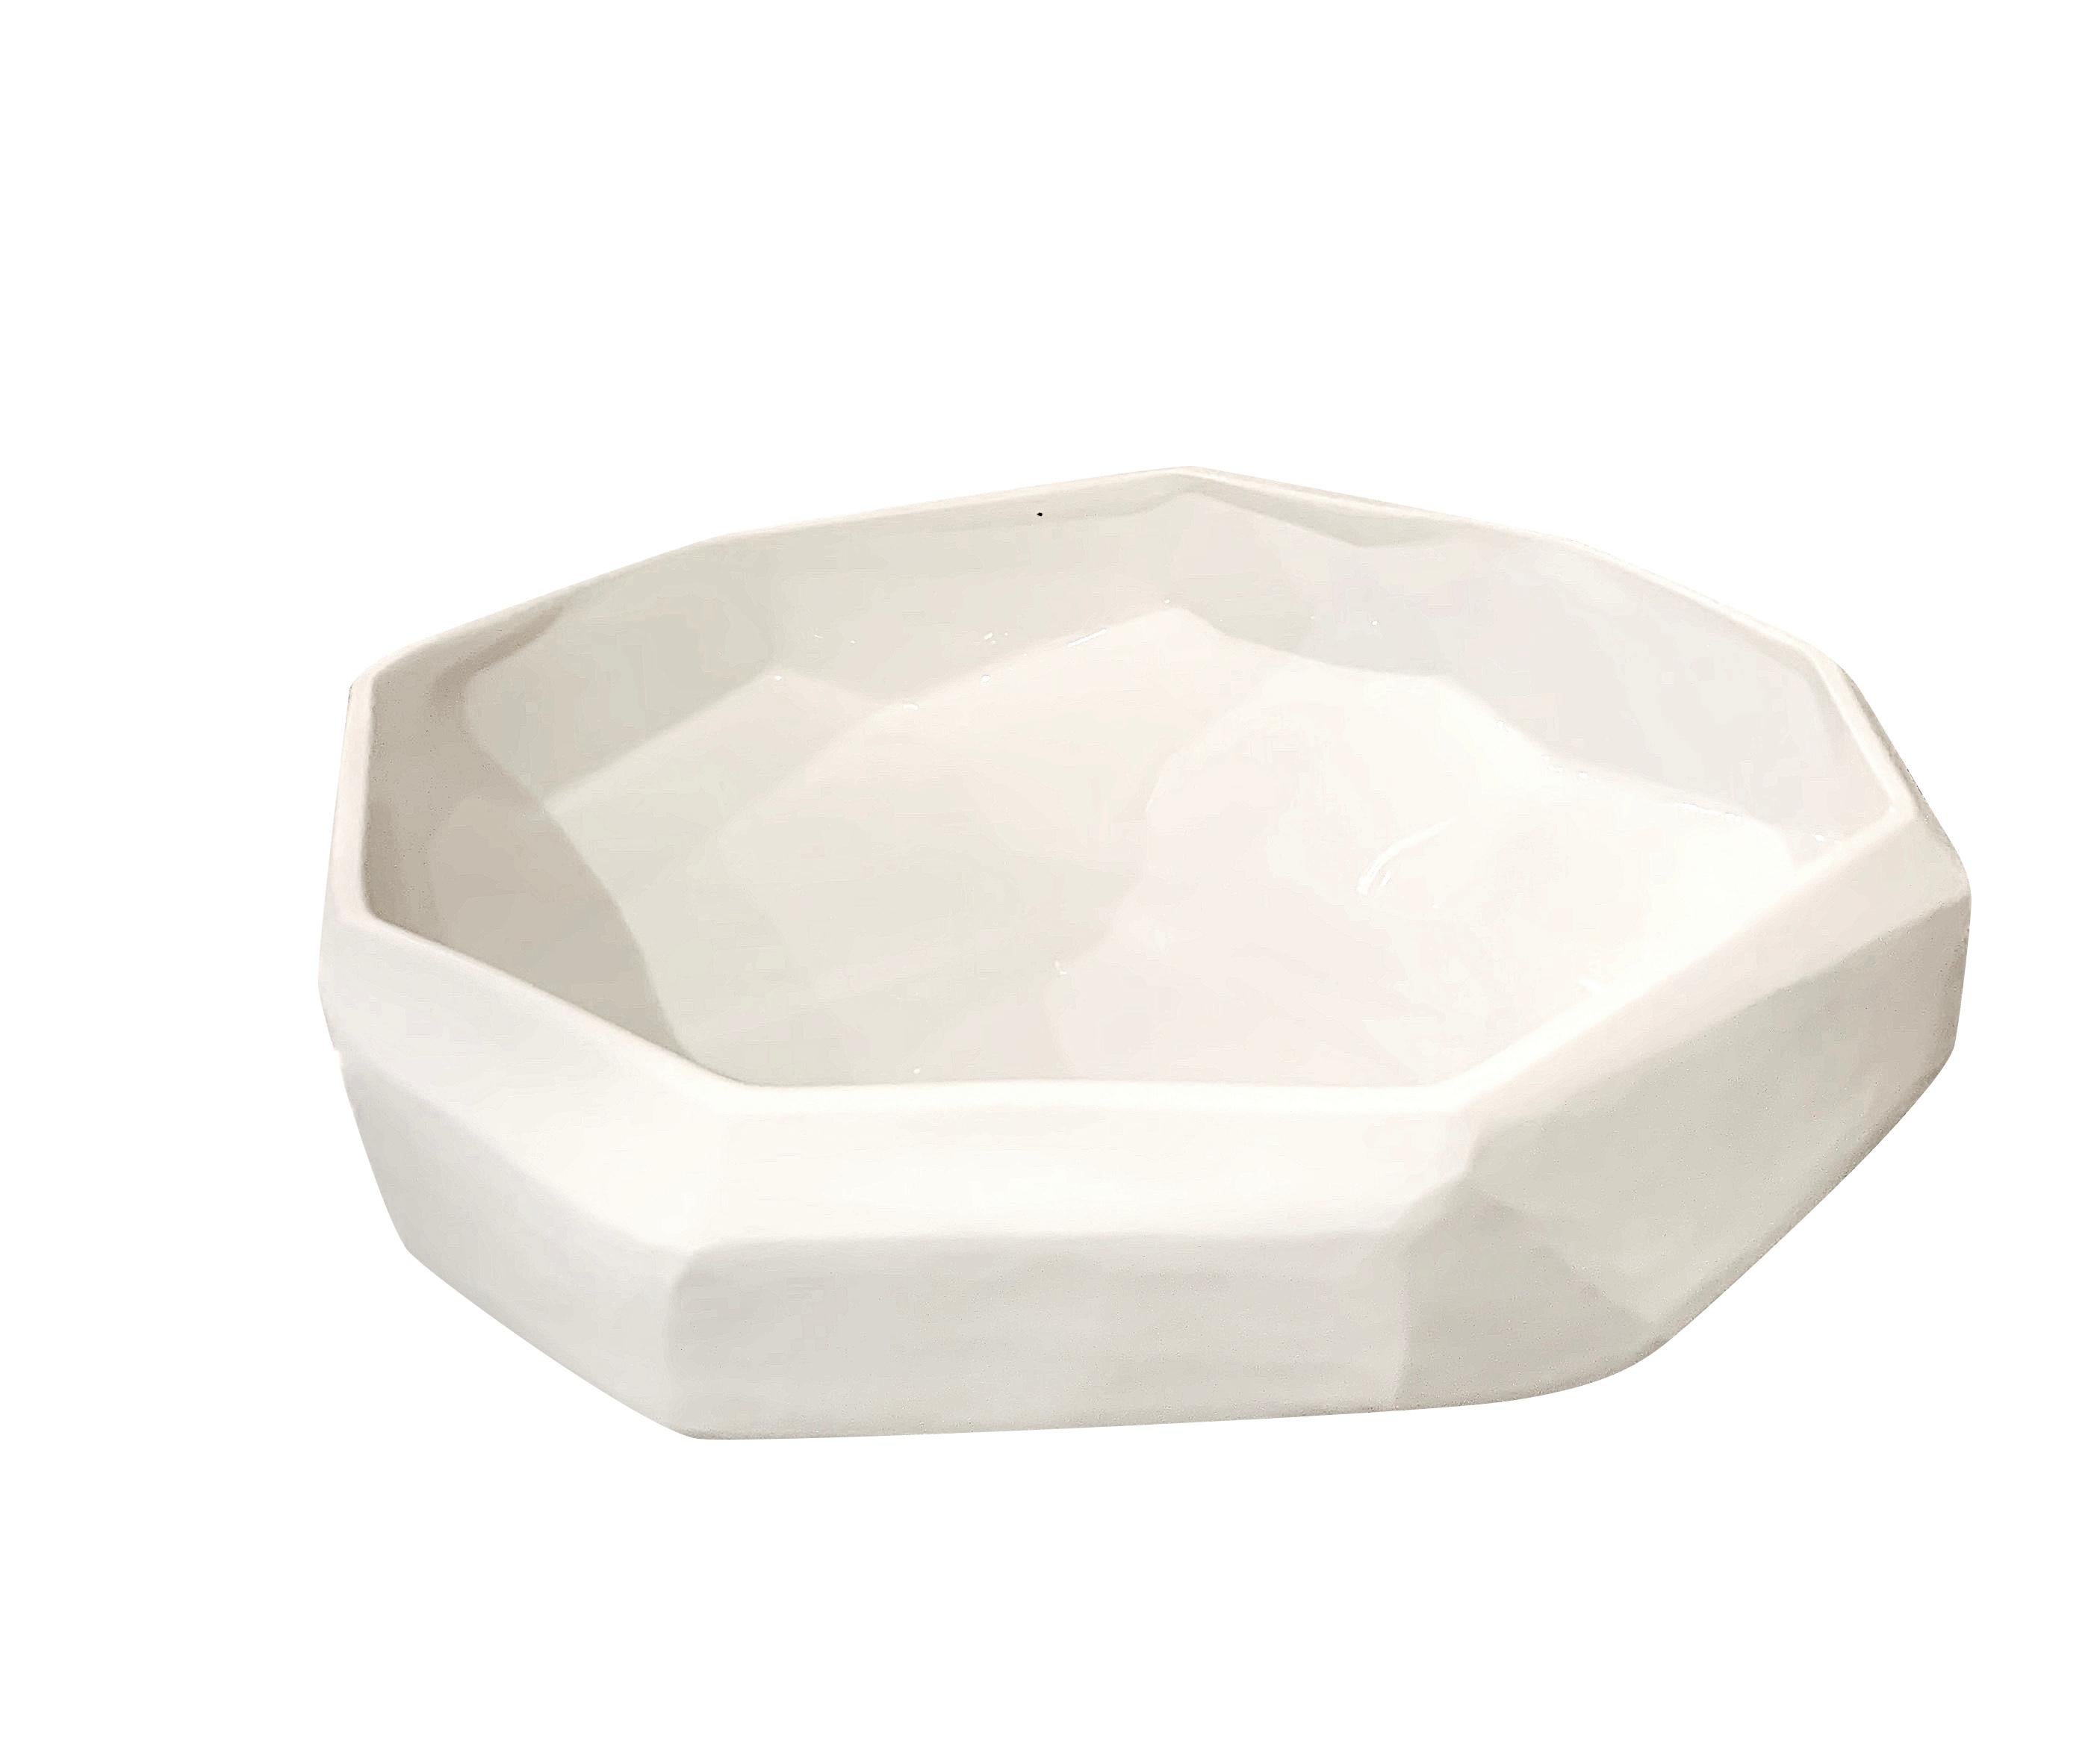 Romanian opaque white glass bowl with decorative cube shape.
The outside of the bowl is matte white, the interior is shiny.